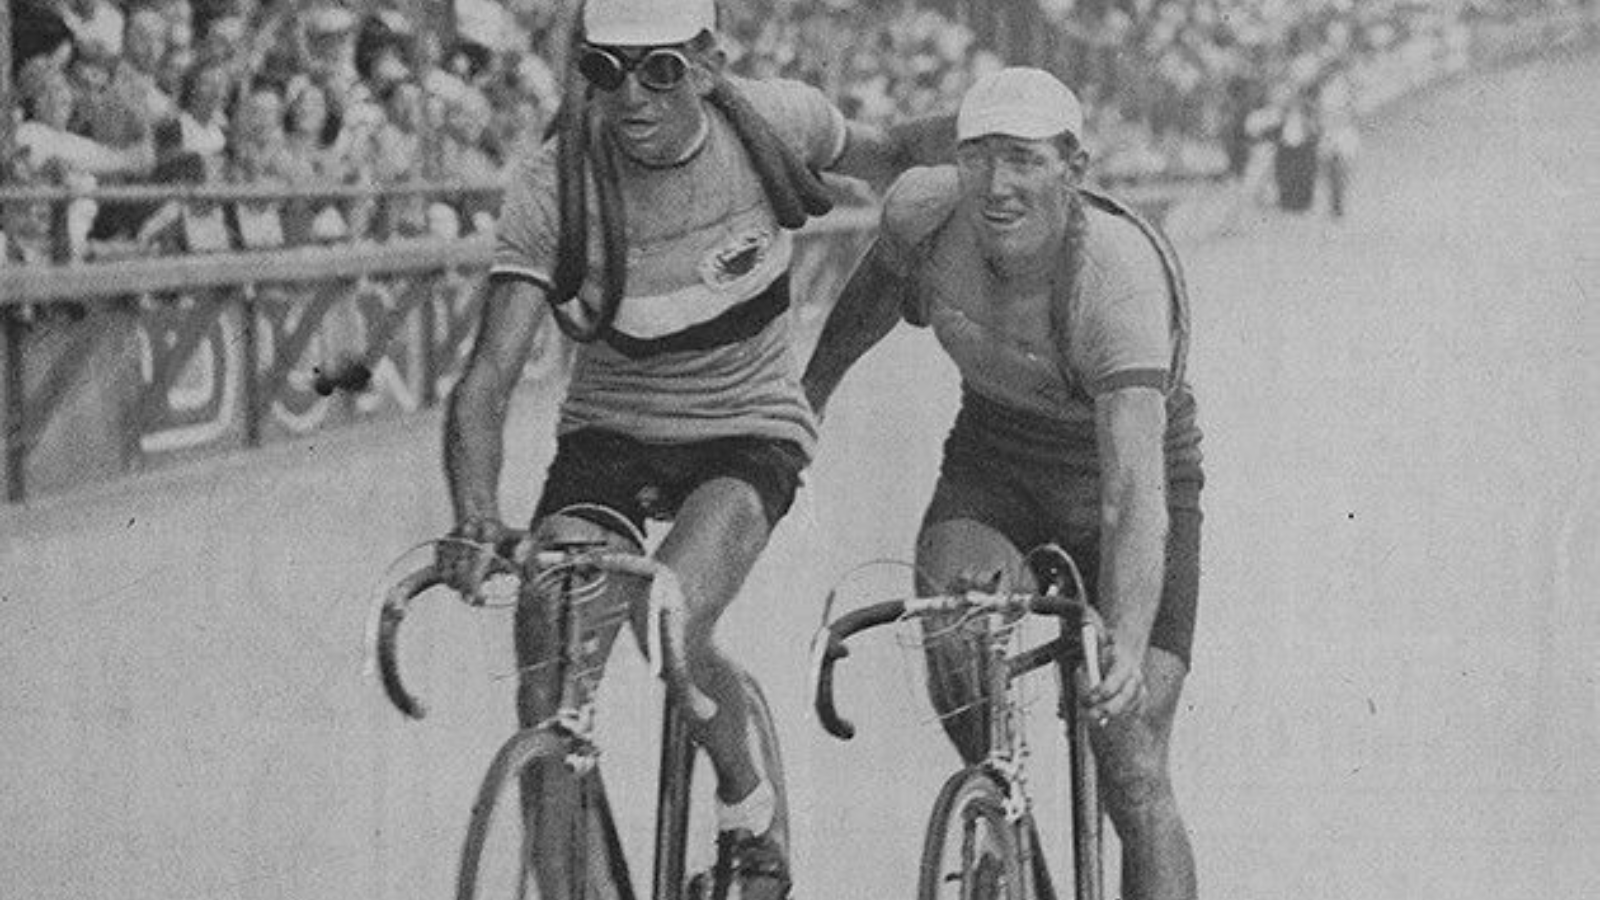 Cyclists crossing the finish line together on the last stage of Tour de France 1938